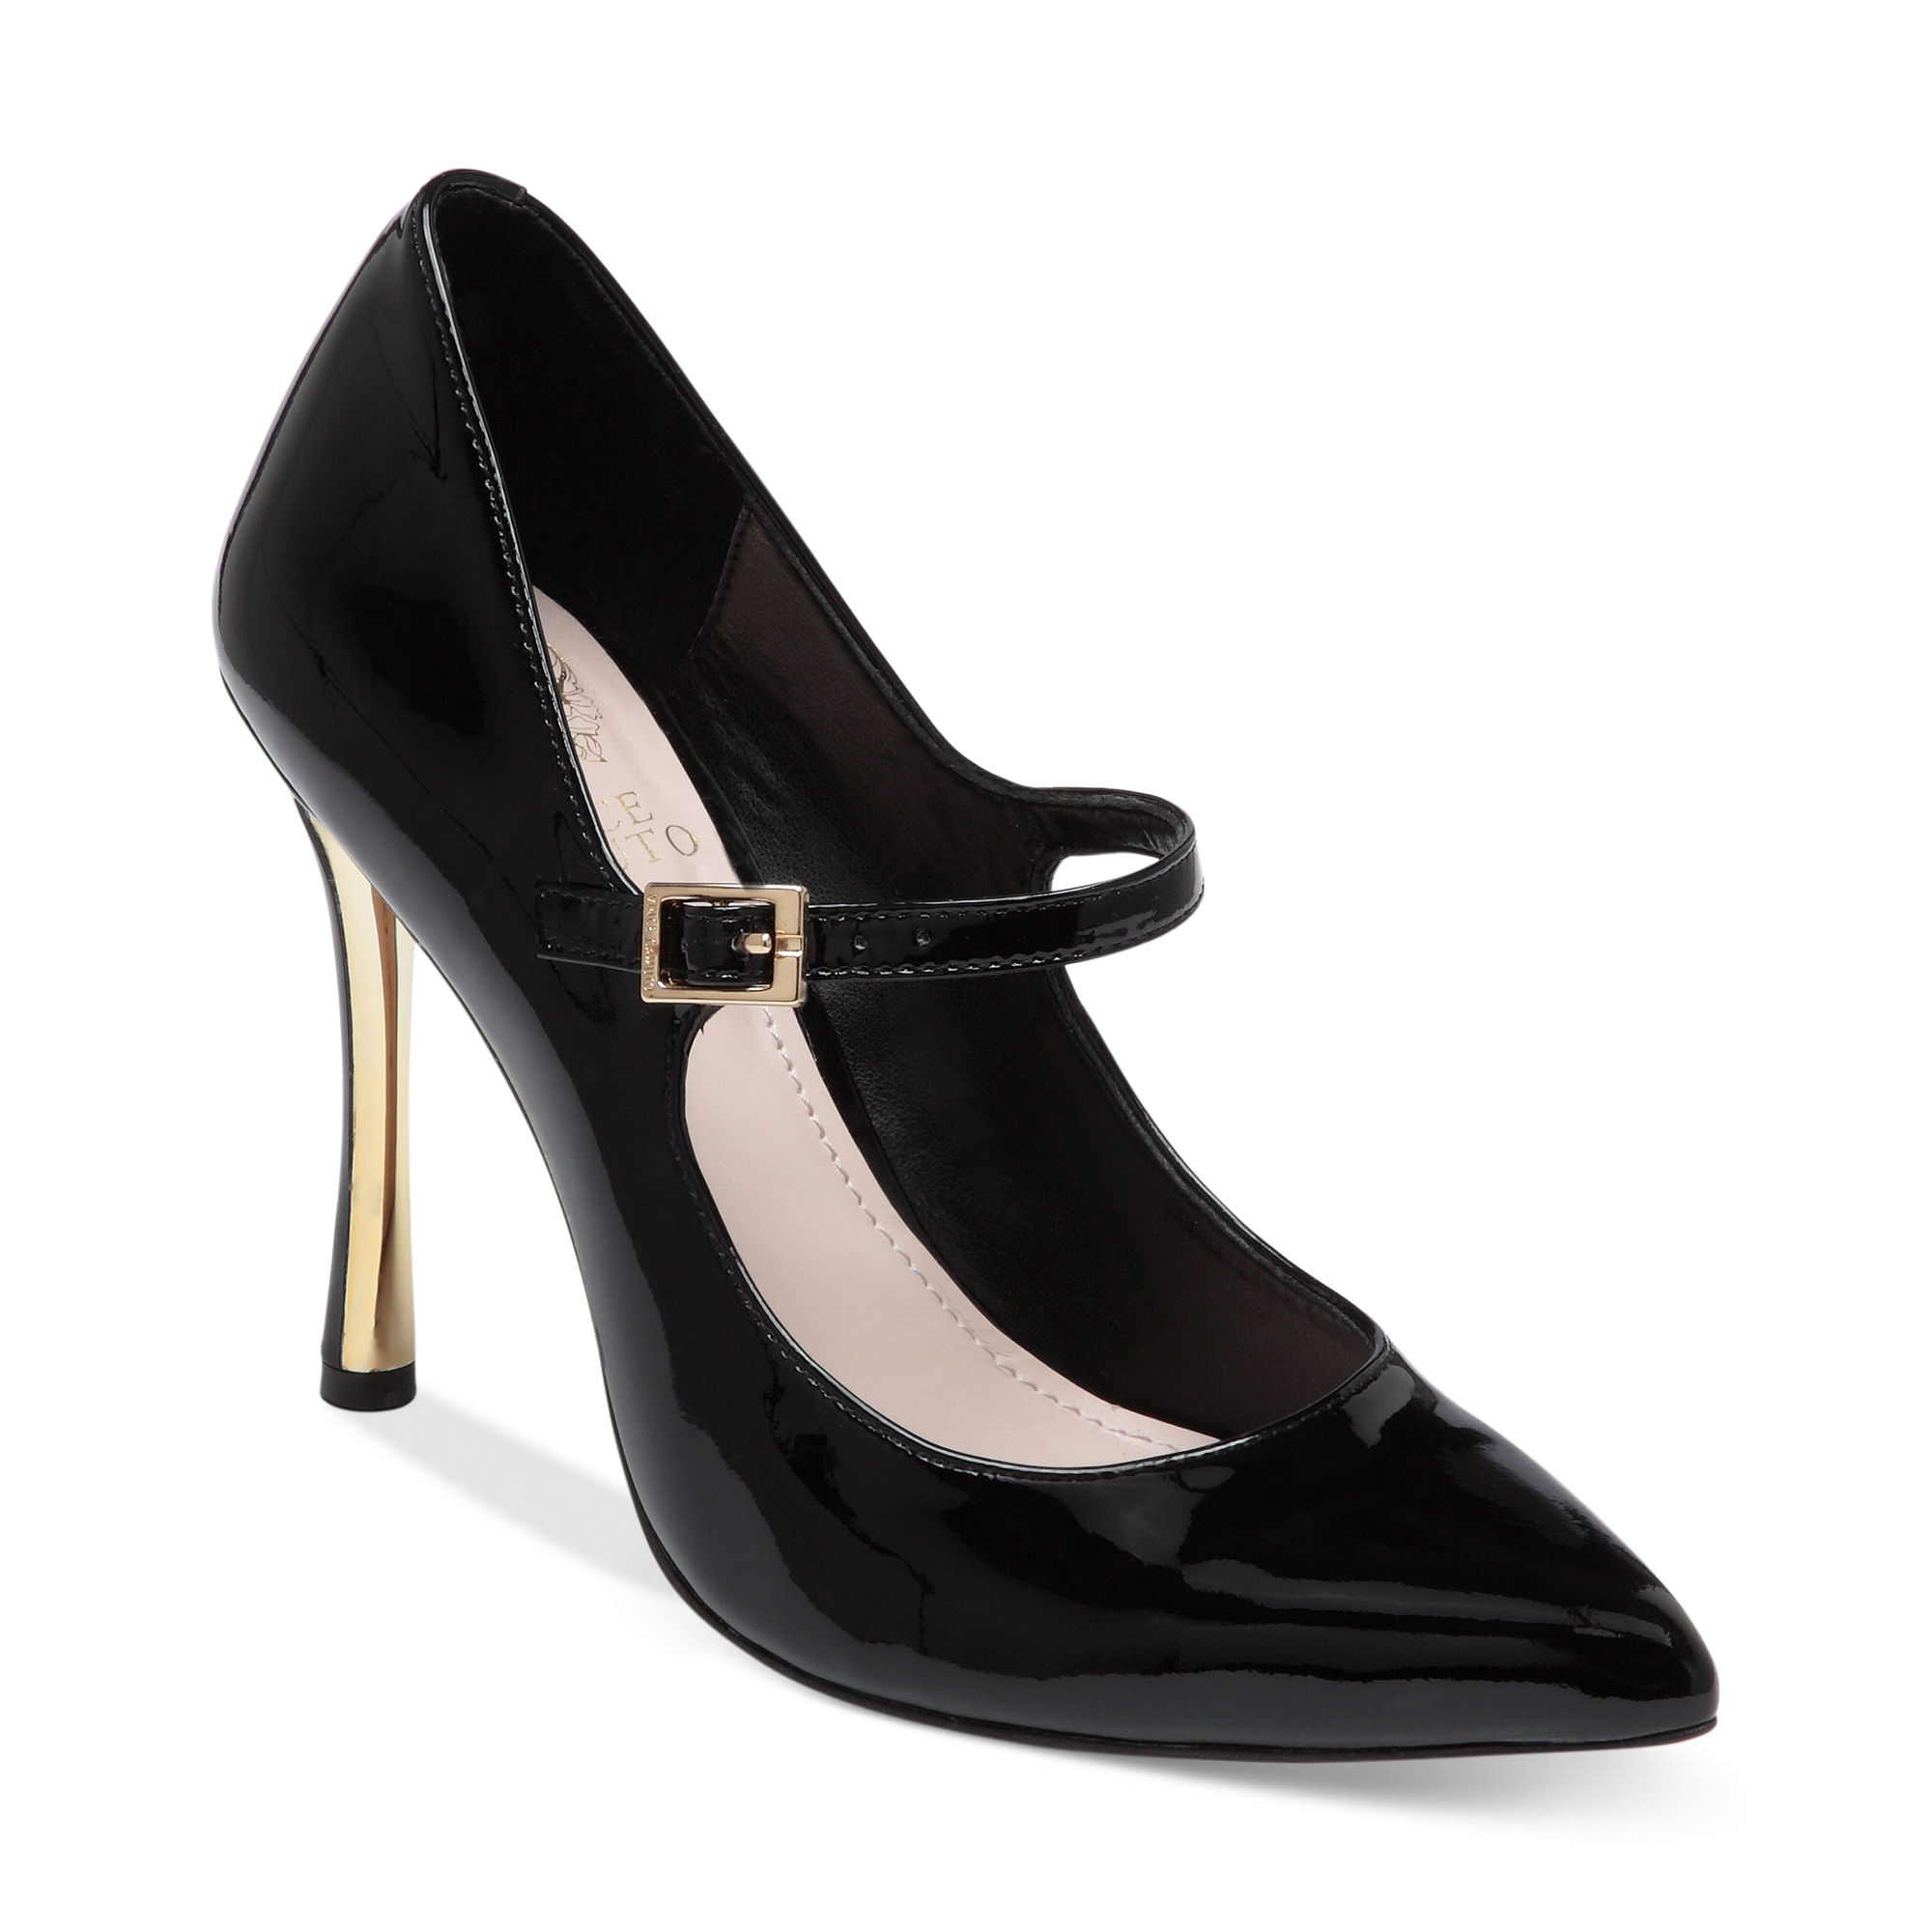 Vince Camuto Callea Mary Jane Pumps in Black | Lyst